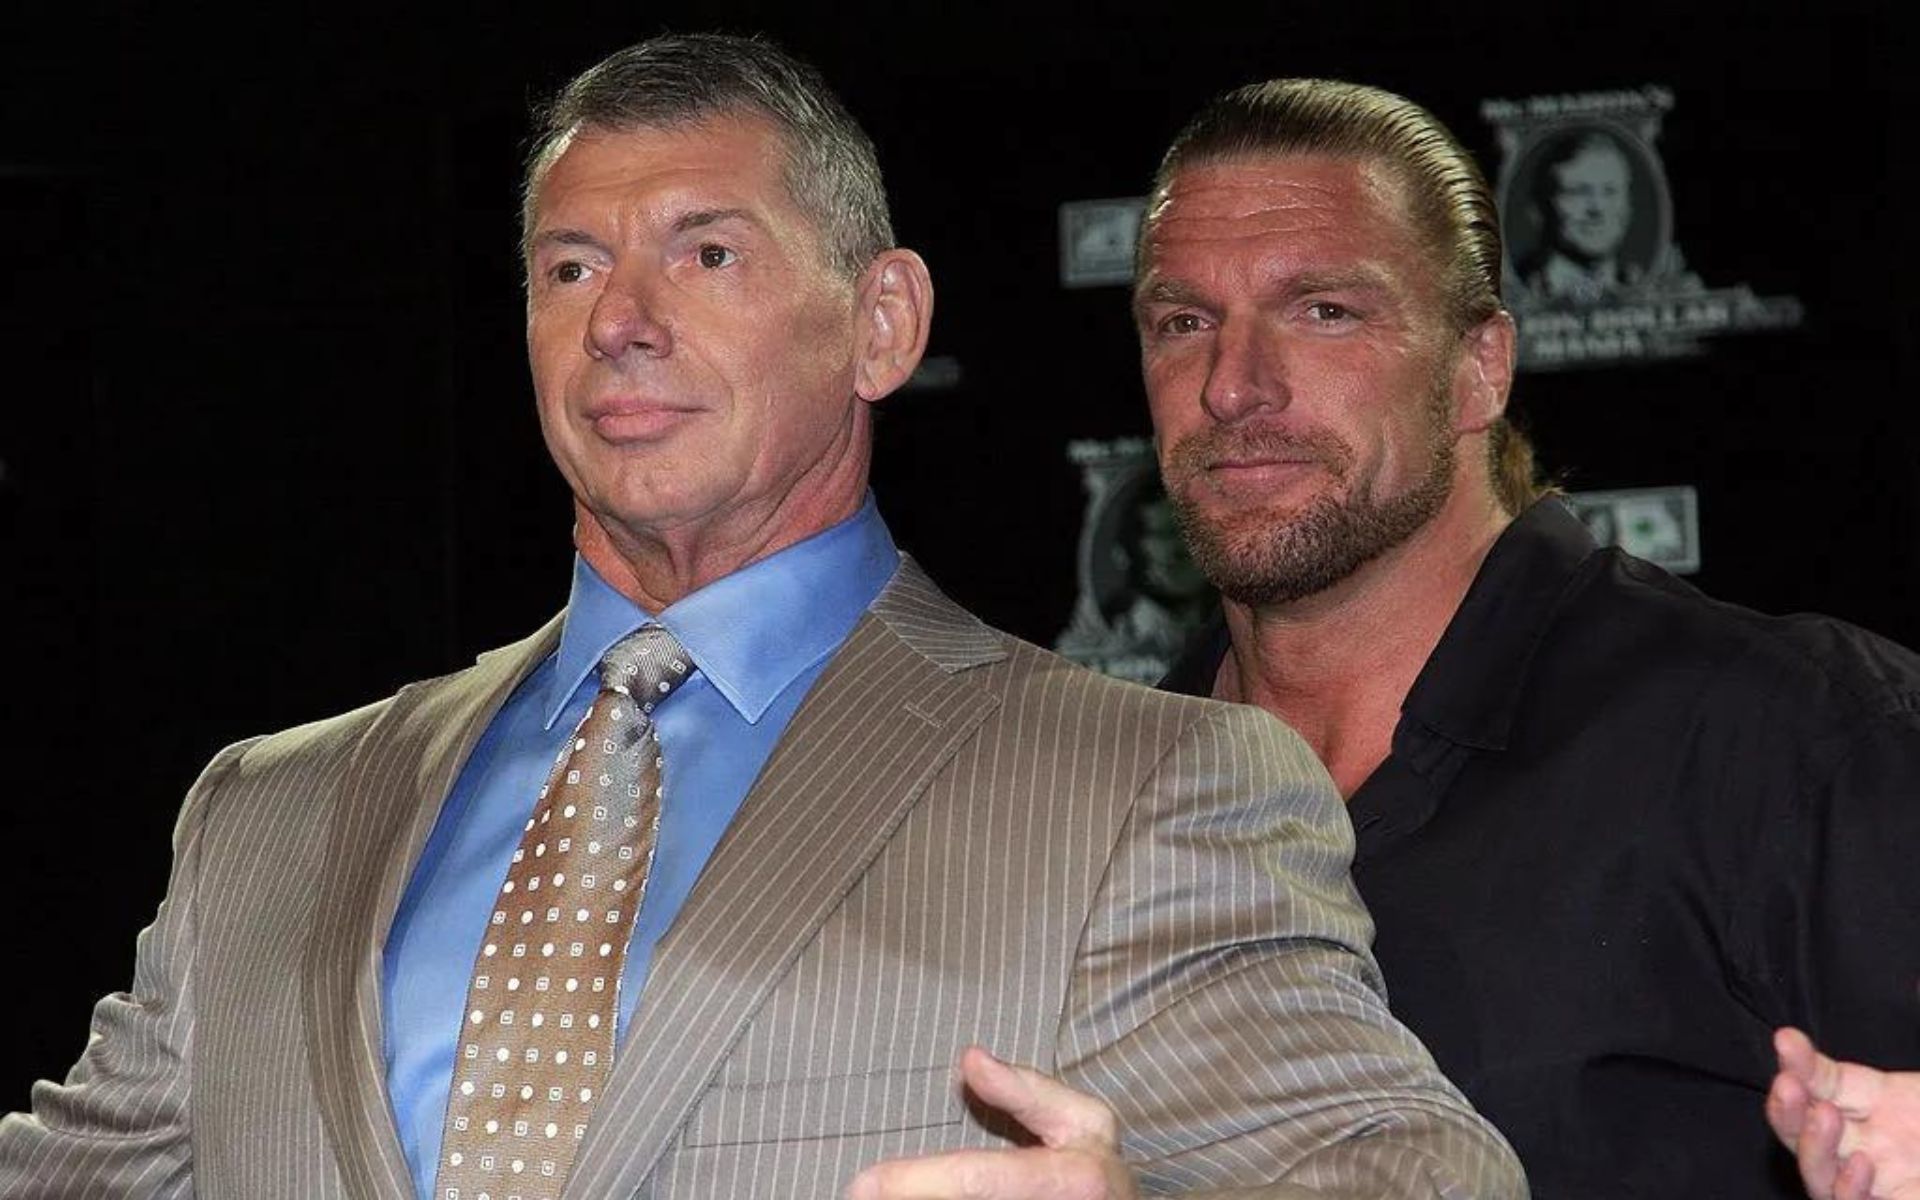 WWE personalities Vince McMahon and Triple H (aka Paul Levesque)